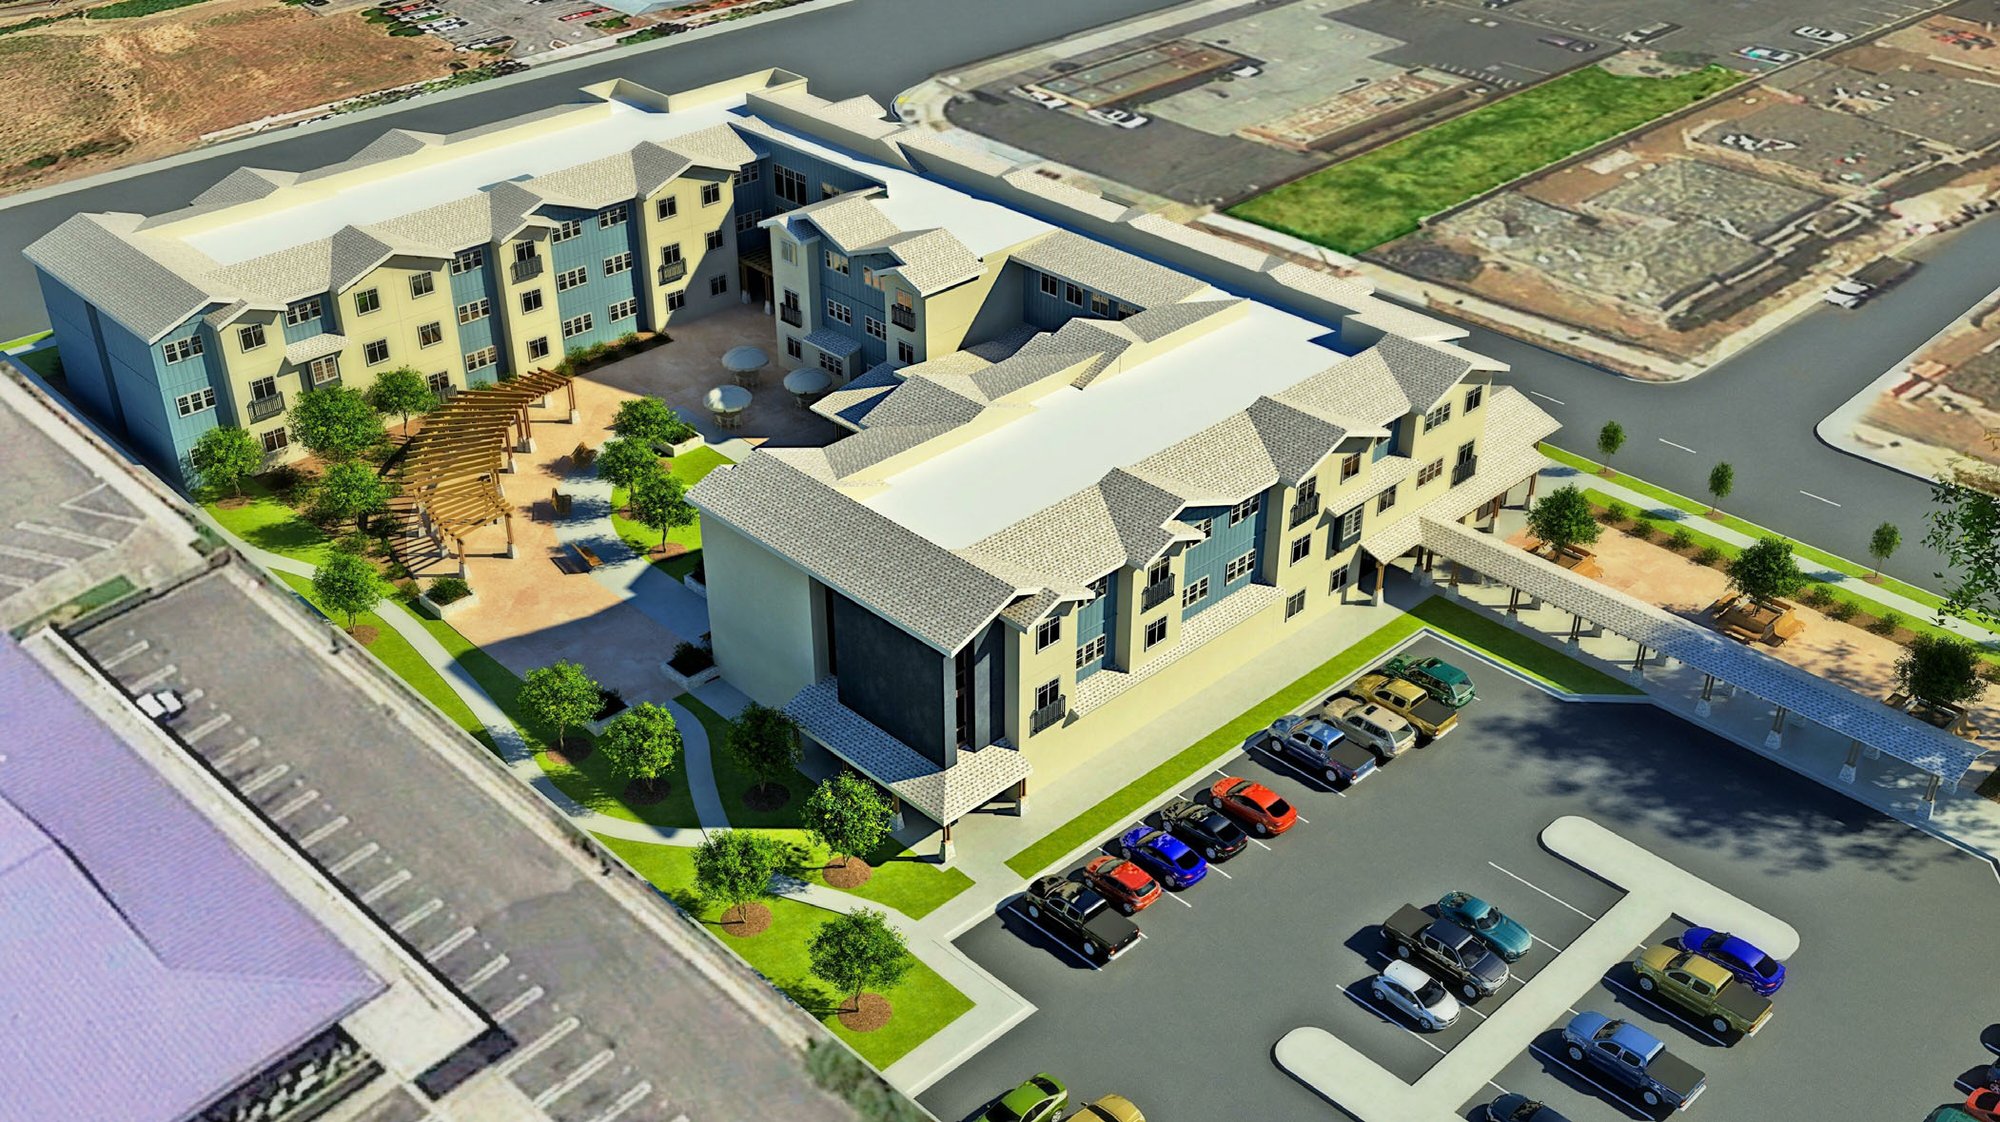 A rendering of the new Morgan Hill affordable housing community.